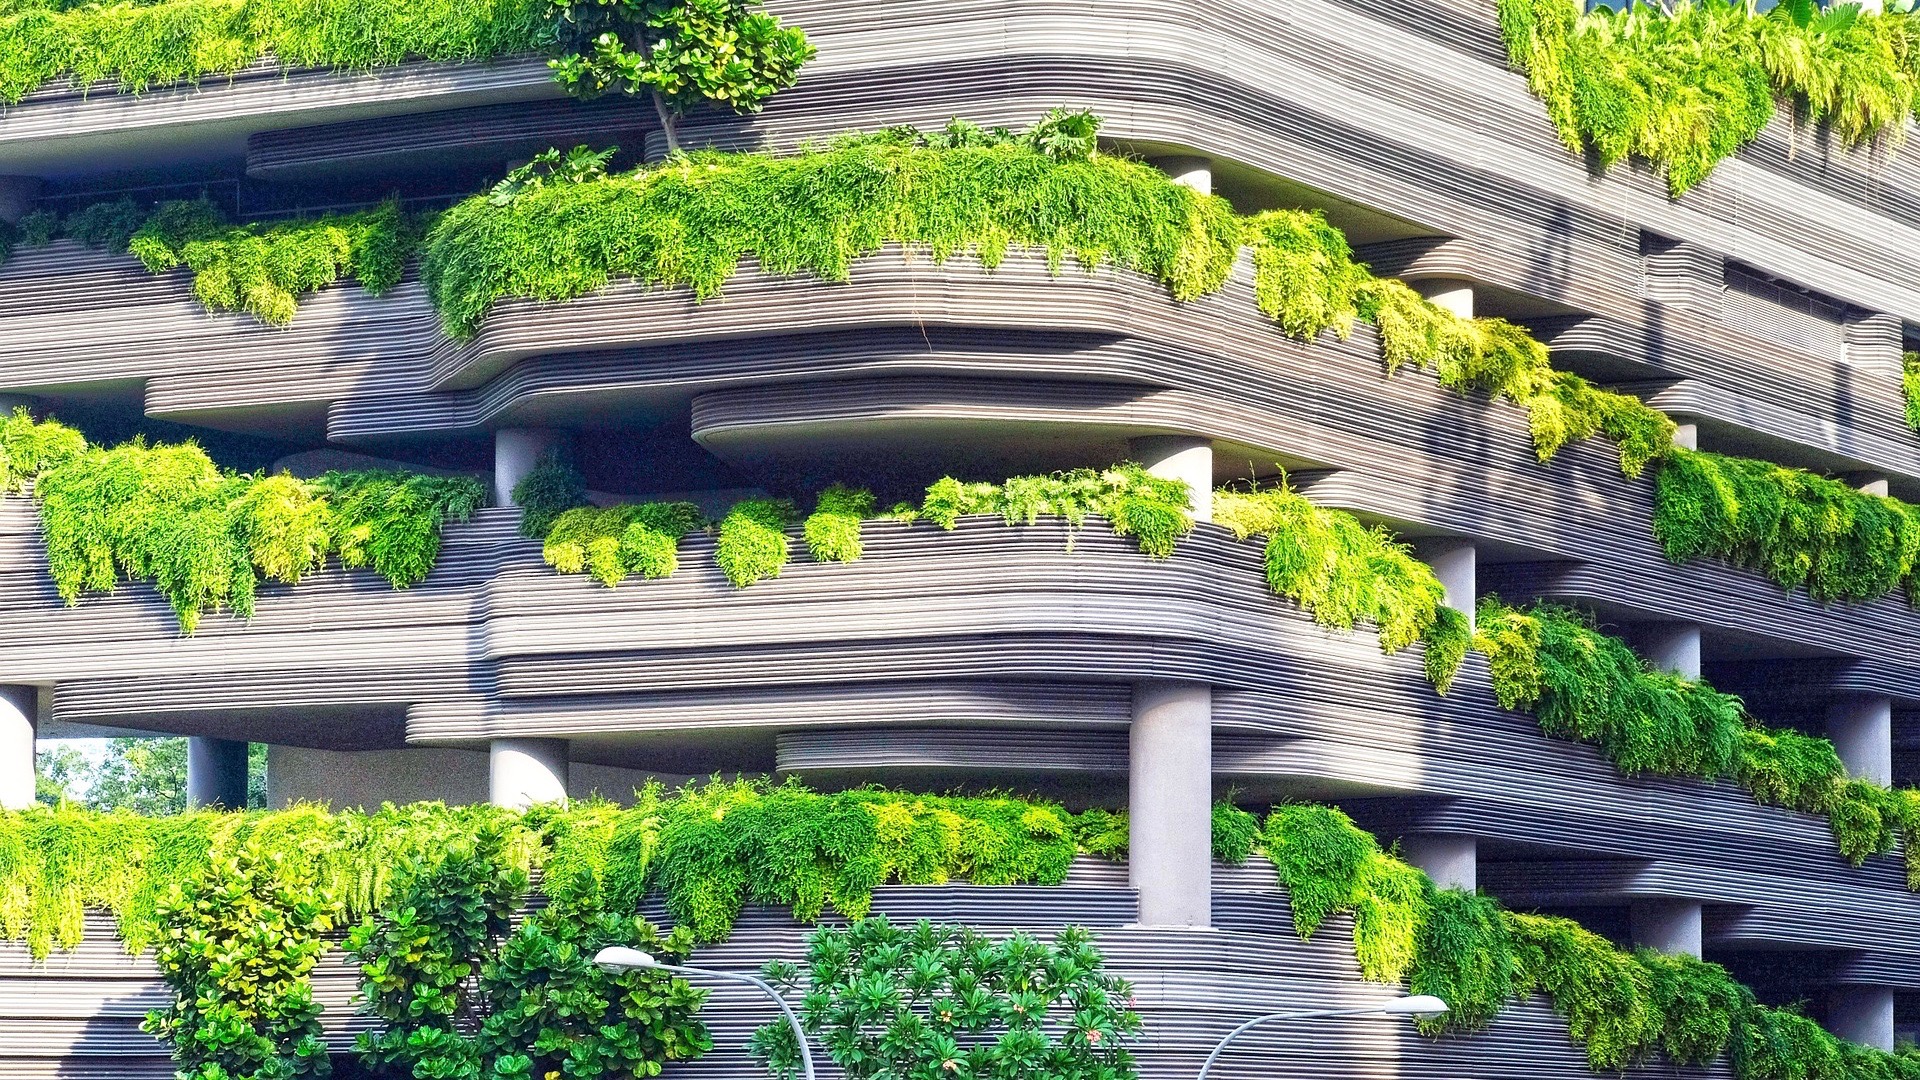 6 Green Architecture Examples From Around the World